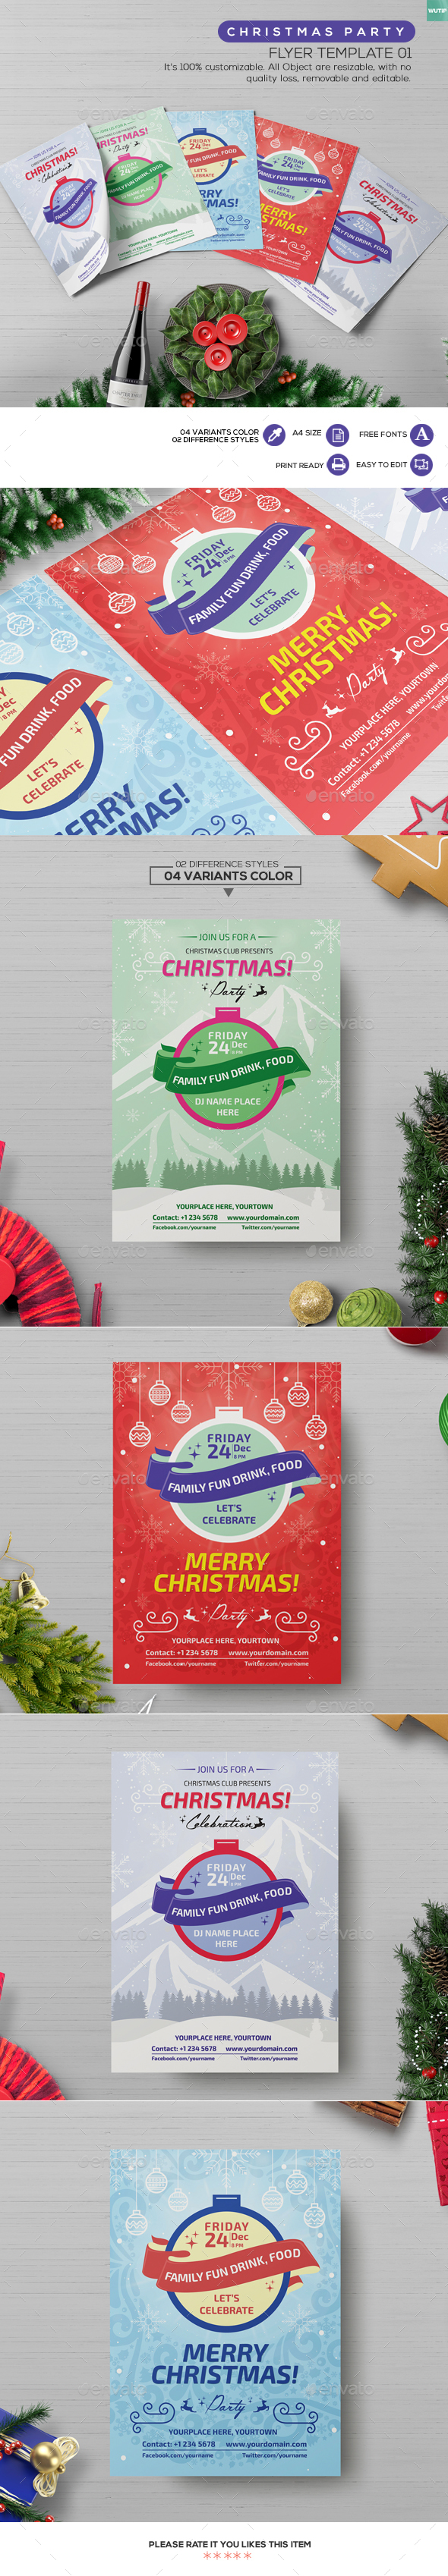 Christmas Party - Flyer Template 01